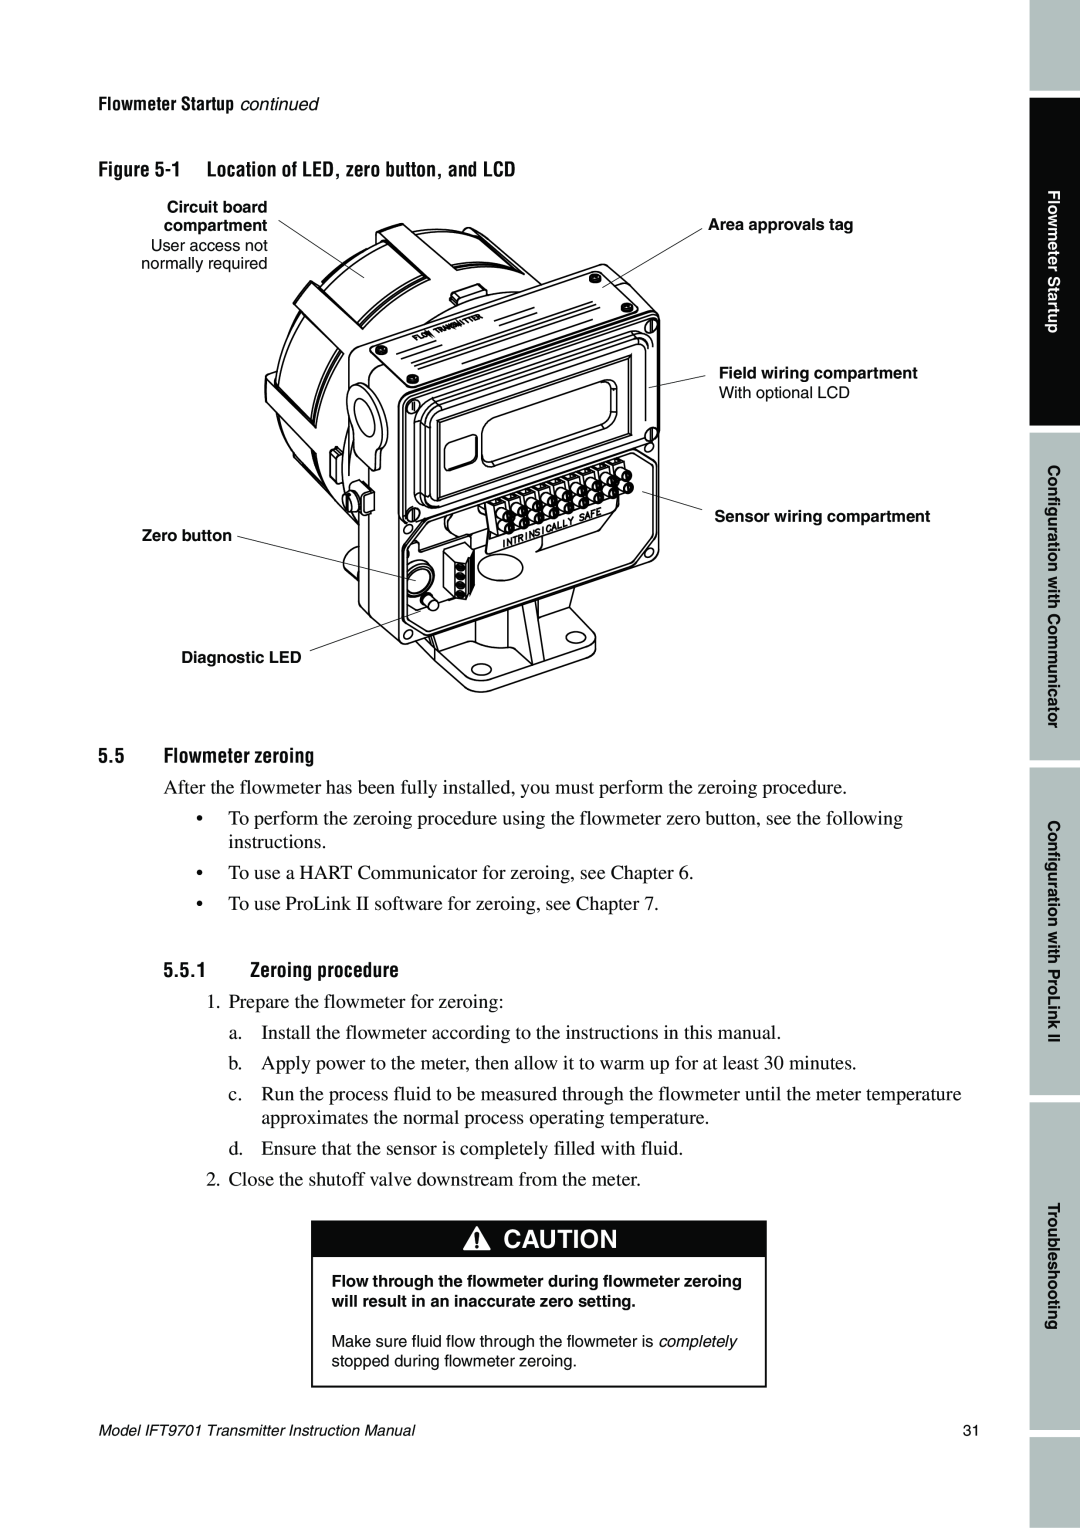 Emerson IFT9701 instruction manual 1Location of LED, zero button, and LCD, 5.5Flowmeter zeroing, 5.5.1Zeroing procedure 